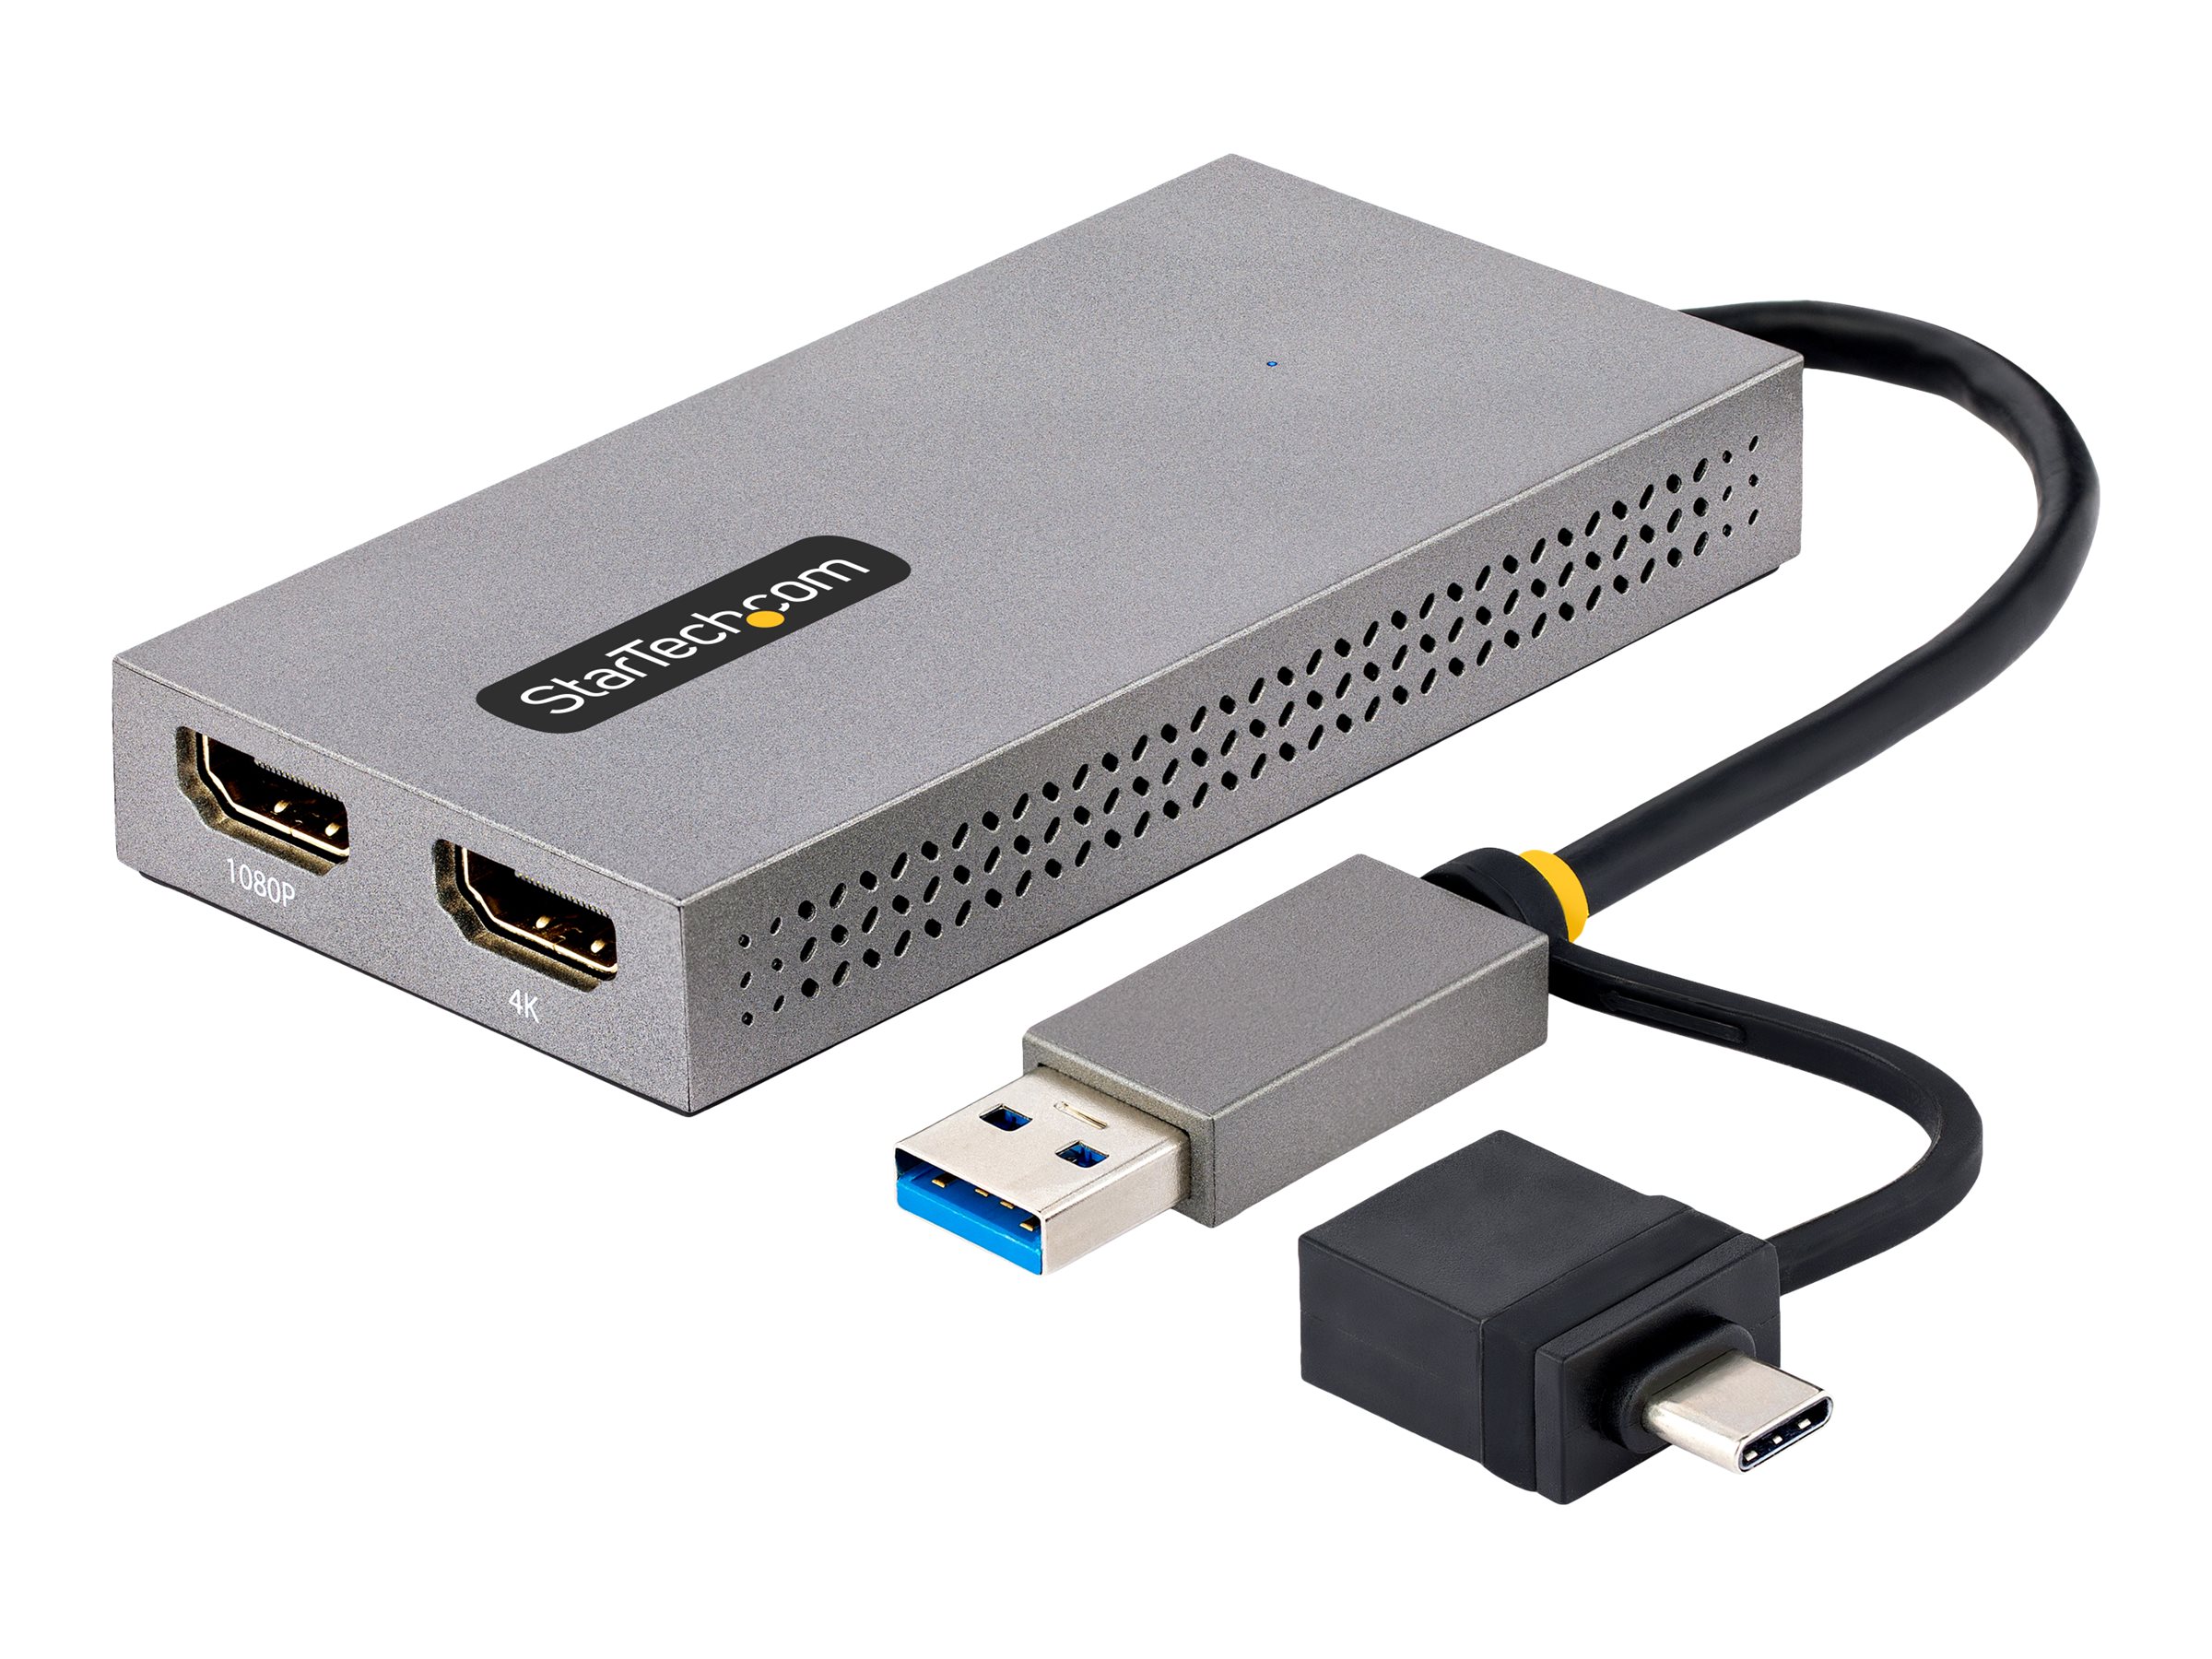 udbrud Parcel Moralsk uddannelse StarTech.com USB to Dual HDMI Adapter, USB A/C to 2x HDMI Monitors (1x 4K  30Hz, 1x 1080p), Integrated USB-A to C Dongle, 4in/11cm Cable, Windows  &amp; macOS | www.publicsector.shidirect.com